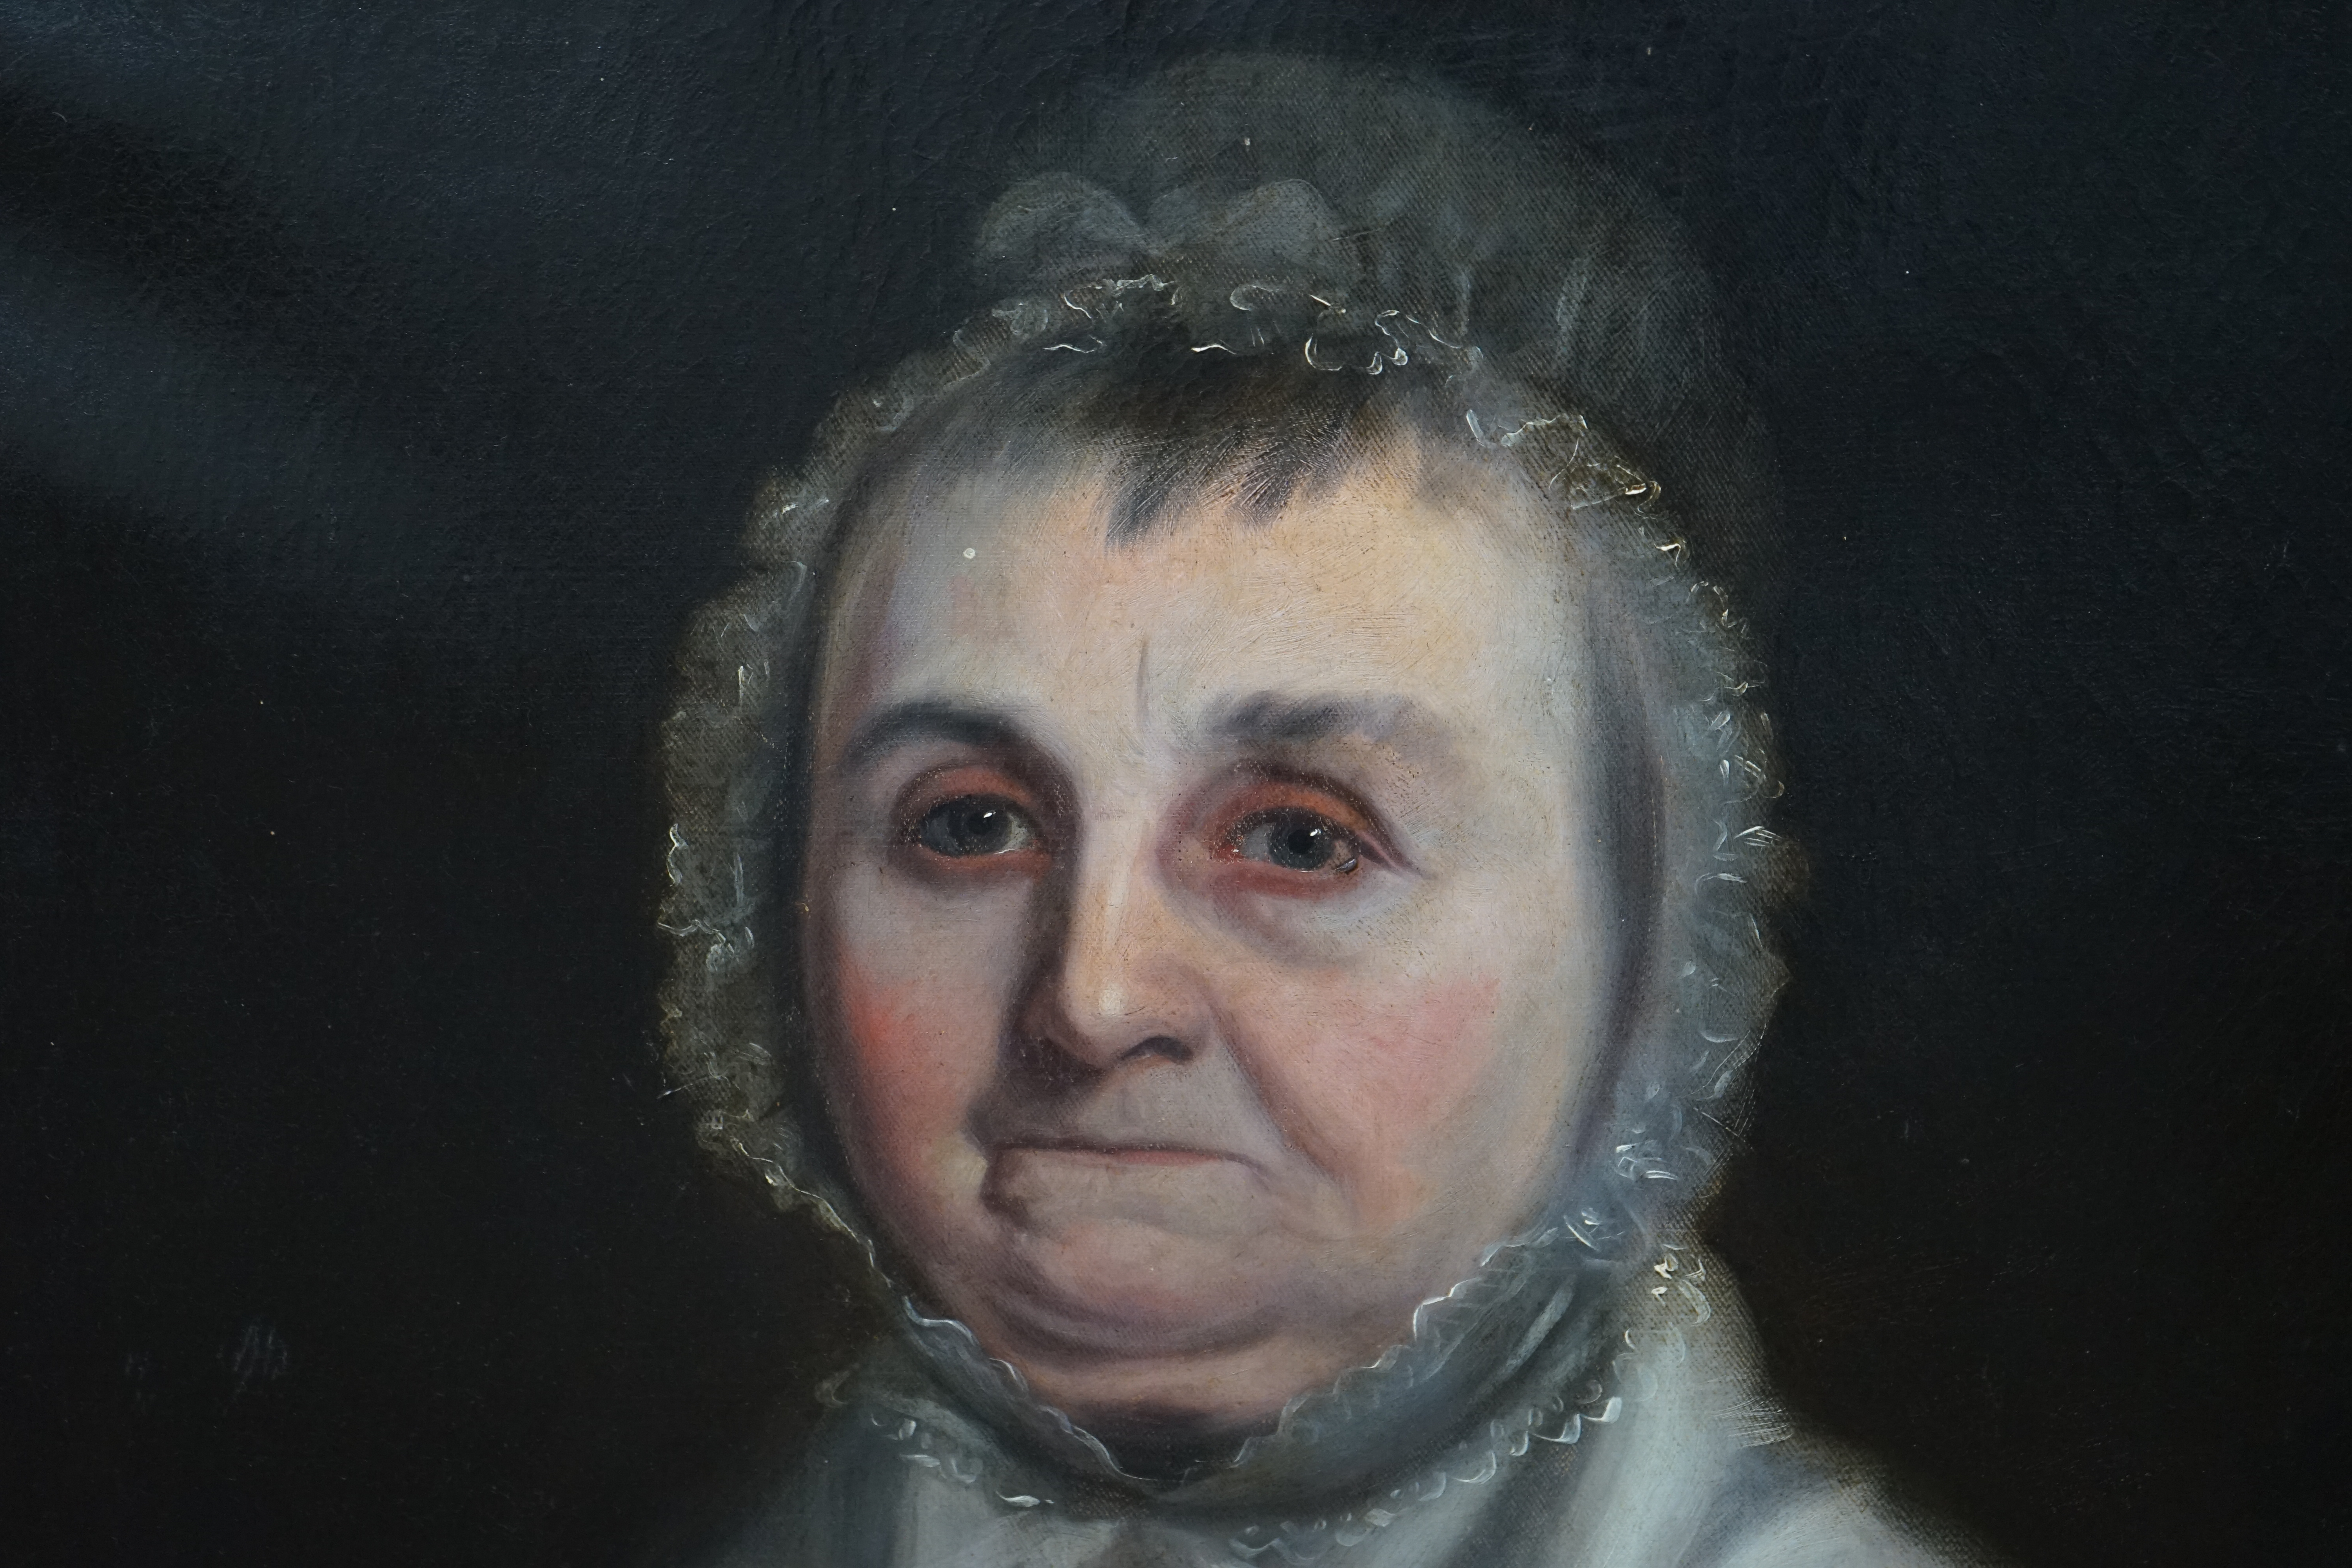 Late 18th / early 19th century English School, oil on canvas, Head and shoulders portrait of an elderly lady wearing a bonnet, unsigned, 74 x 62cm, label verso, ornately framed. Condition - fair, original canvas sagging